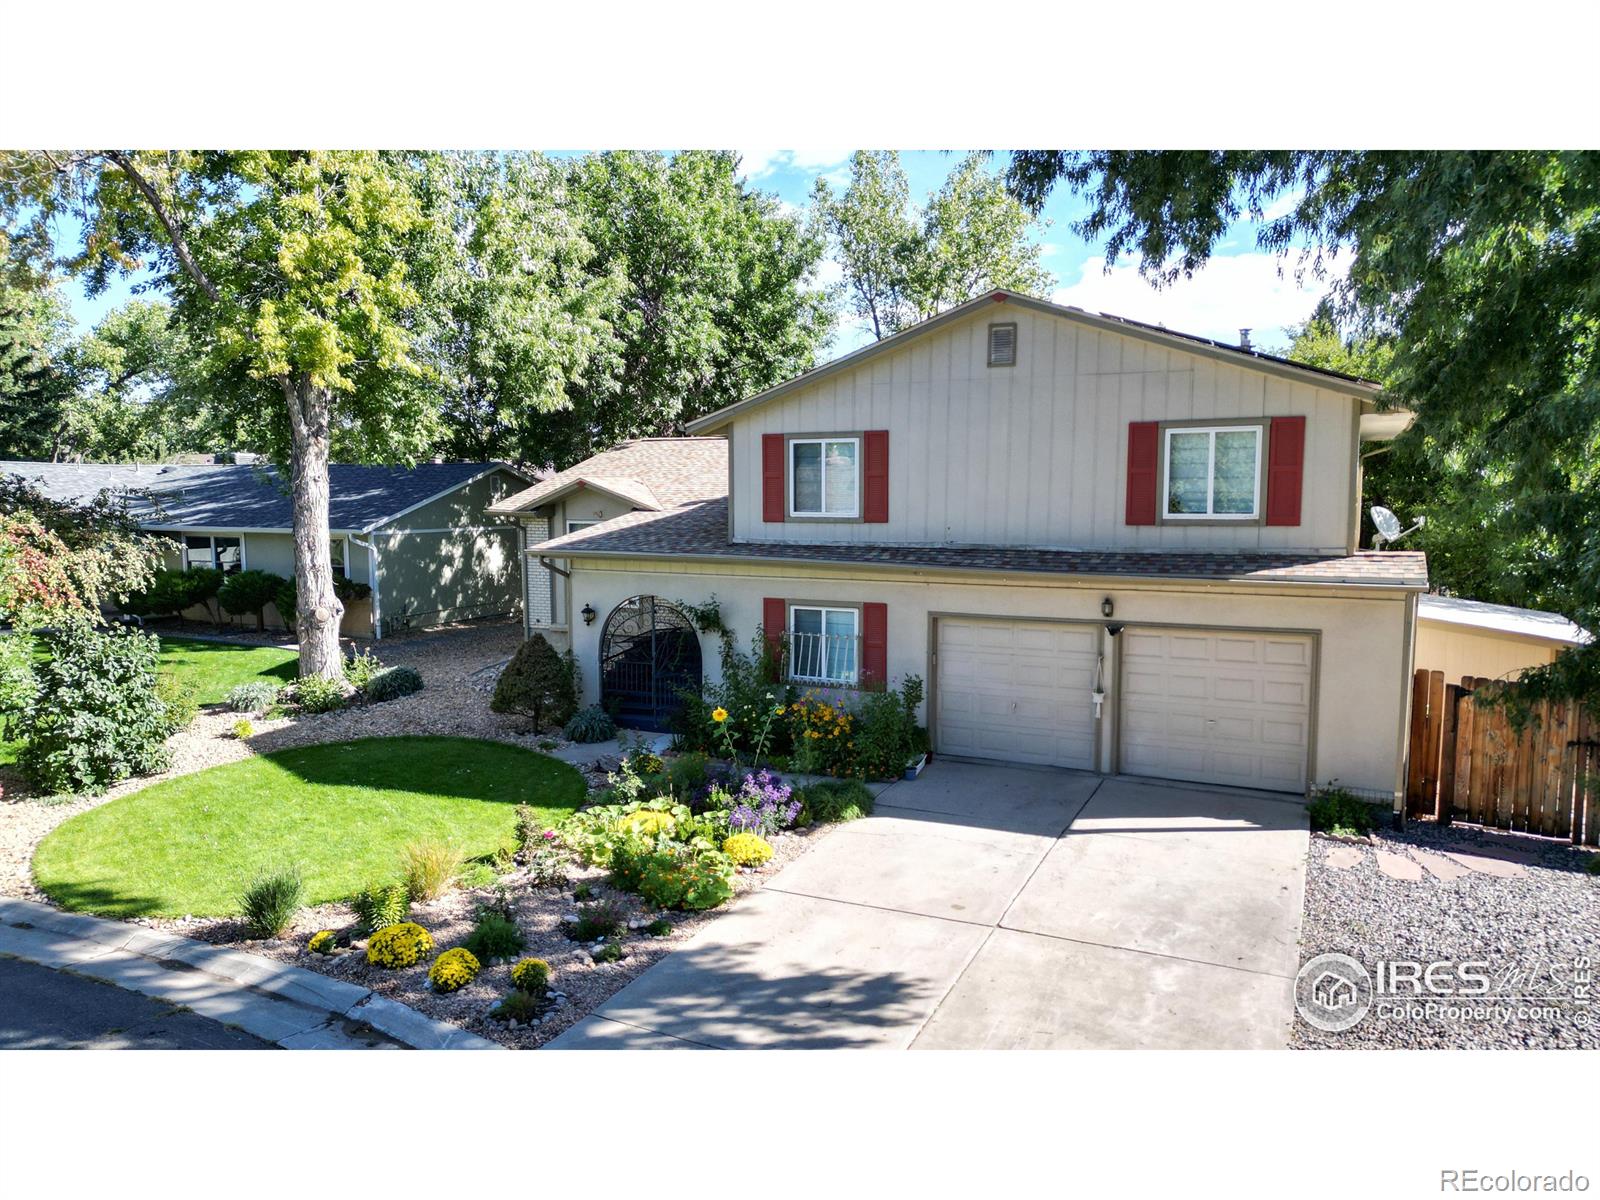 8406  quay drive, Arvada sold home. Closed on 2024-02-01 for $657,500.